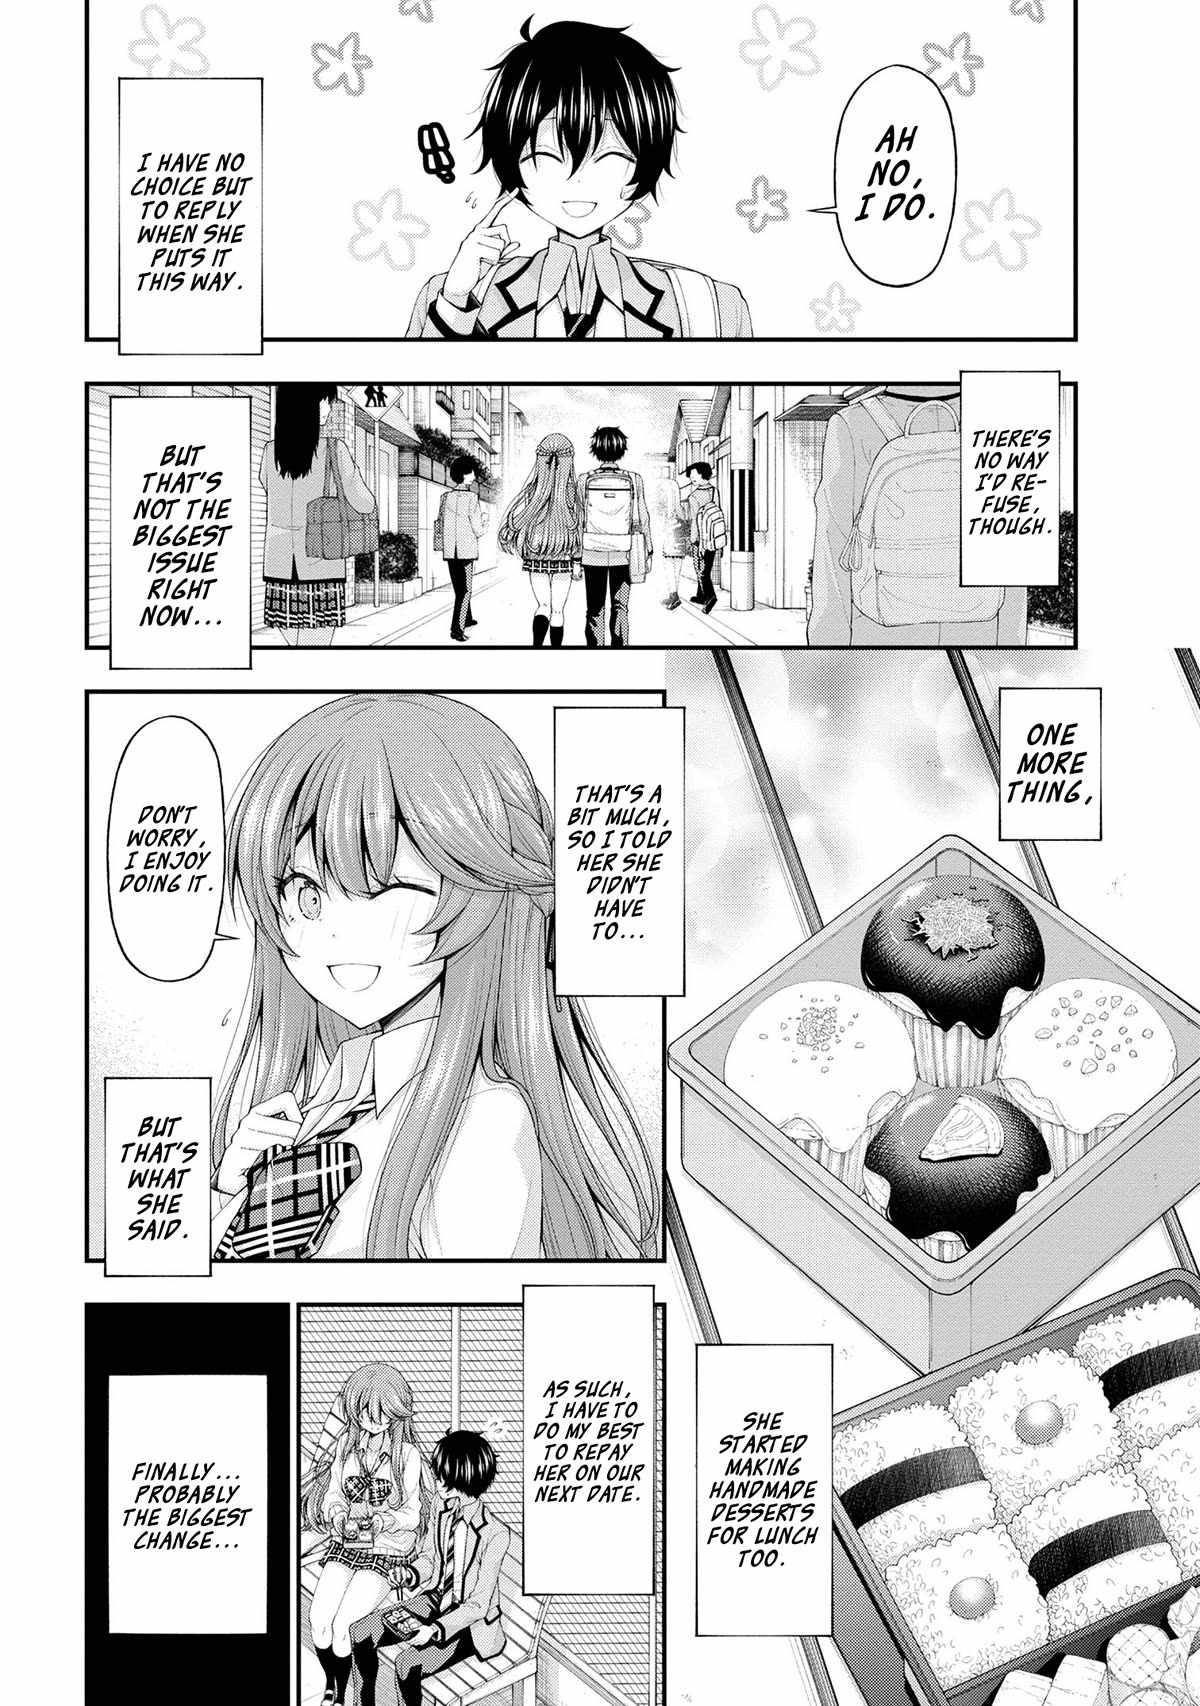 The Gal Who Was Meant to Confess to Me as a Game Punishment Has Apparently Fallen in Love with Me Chapter 13-eng-li - Page 19